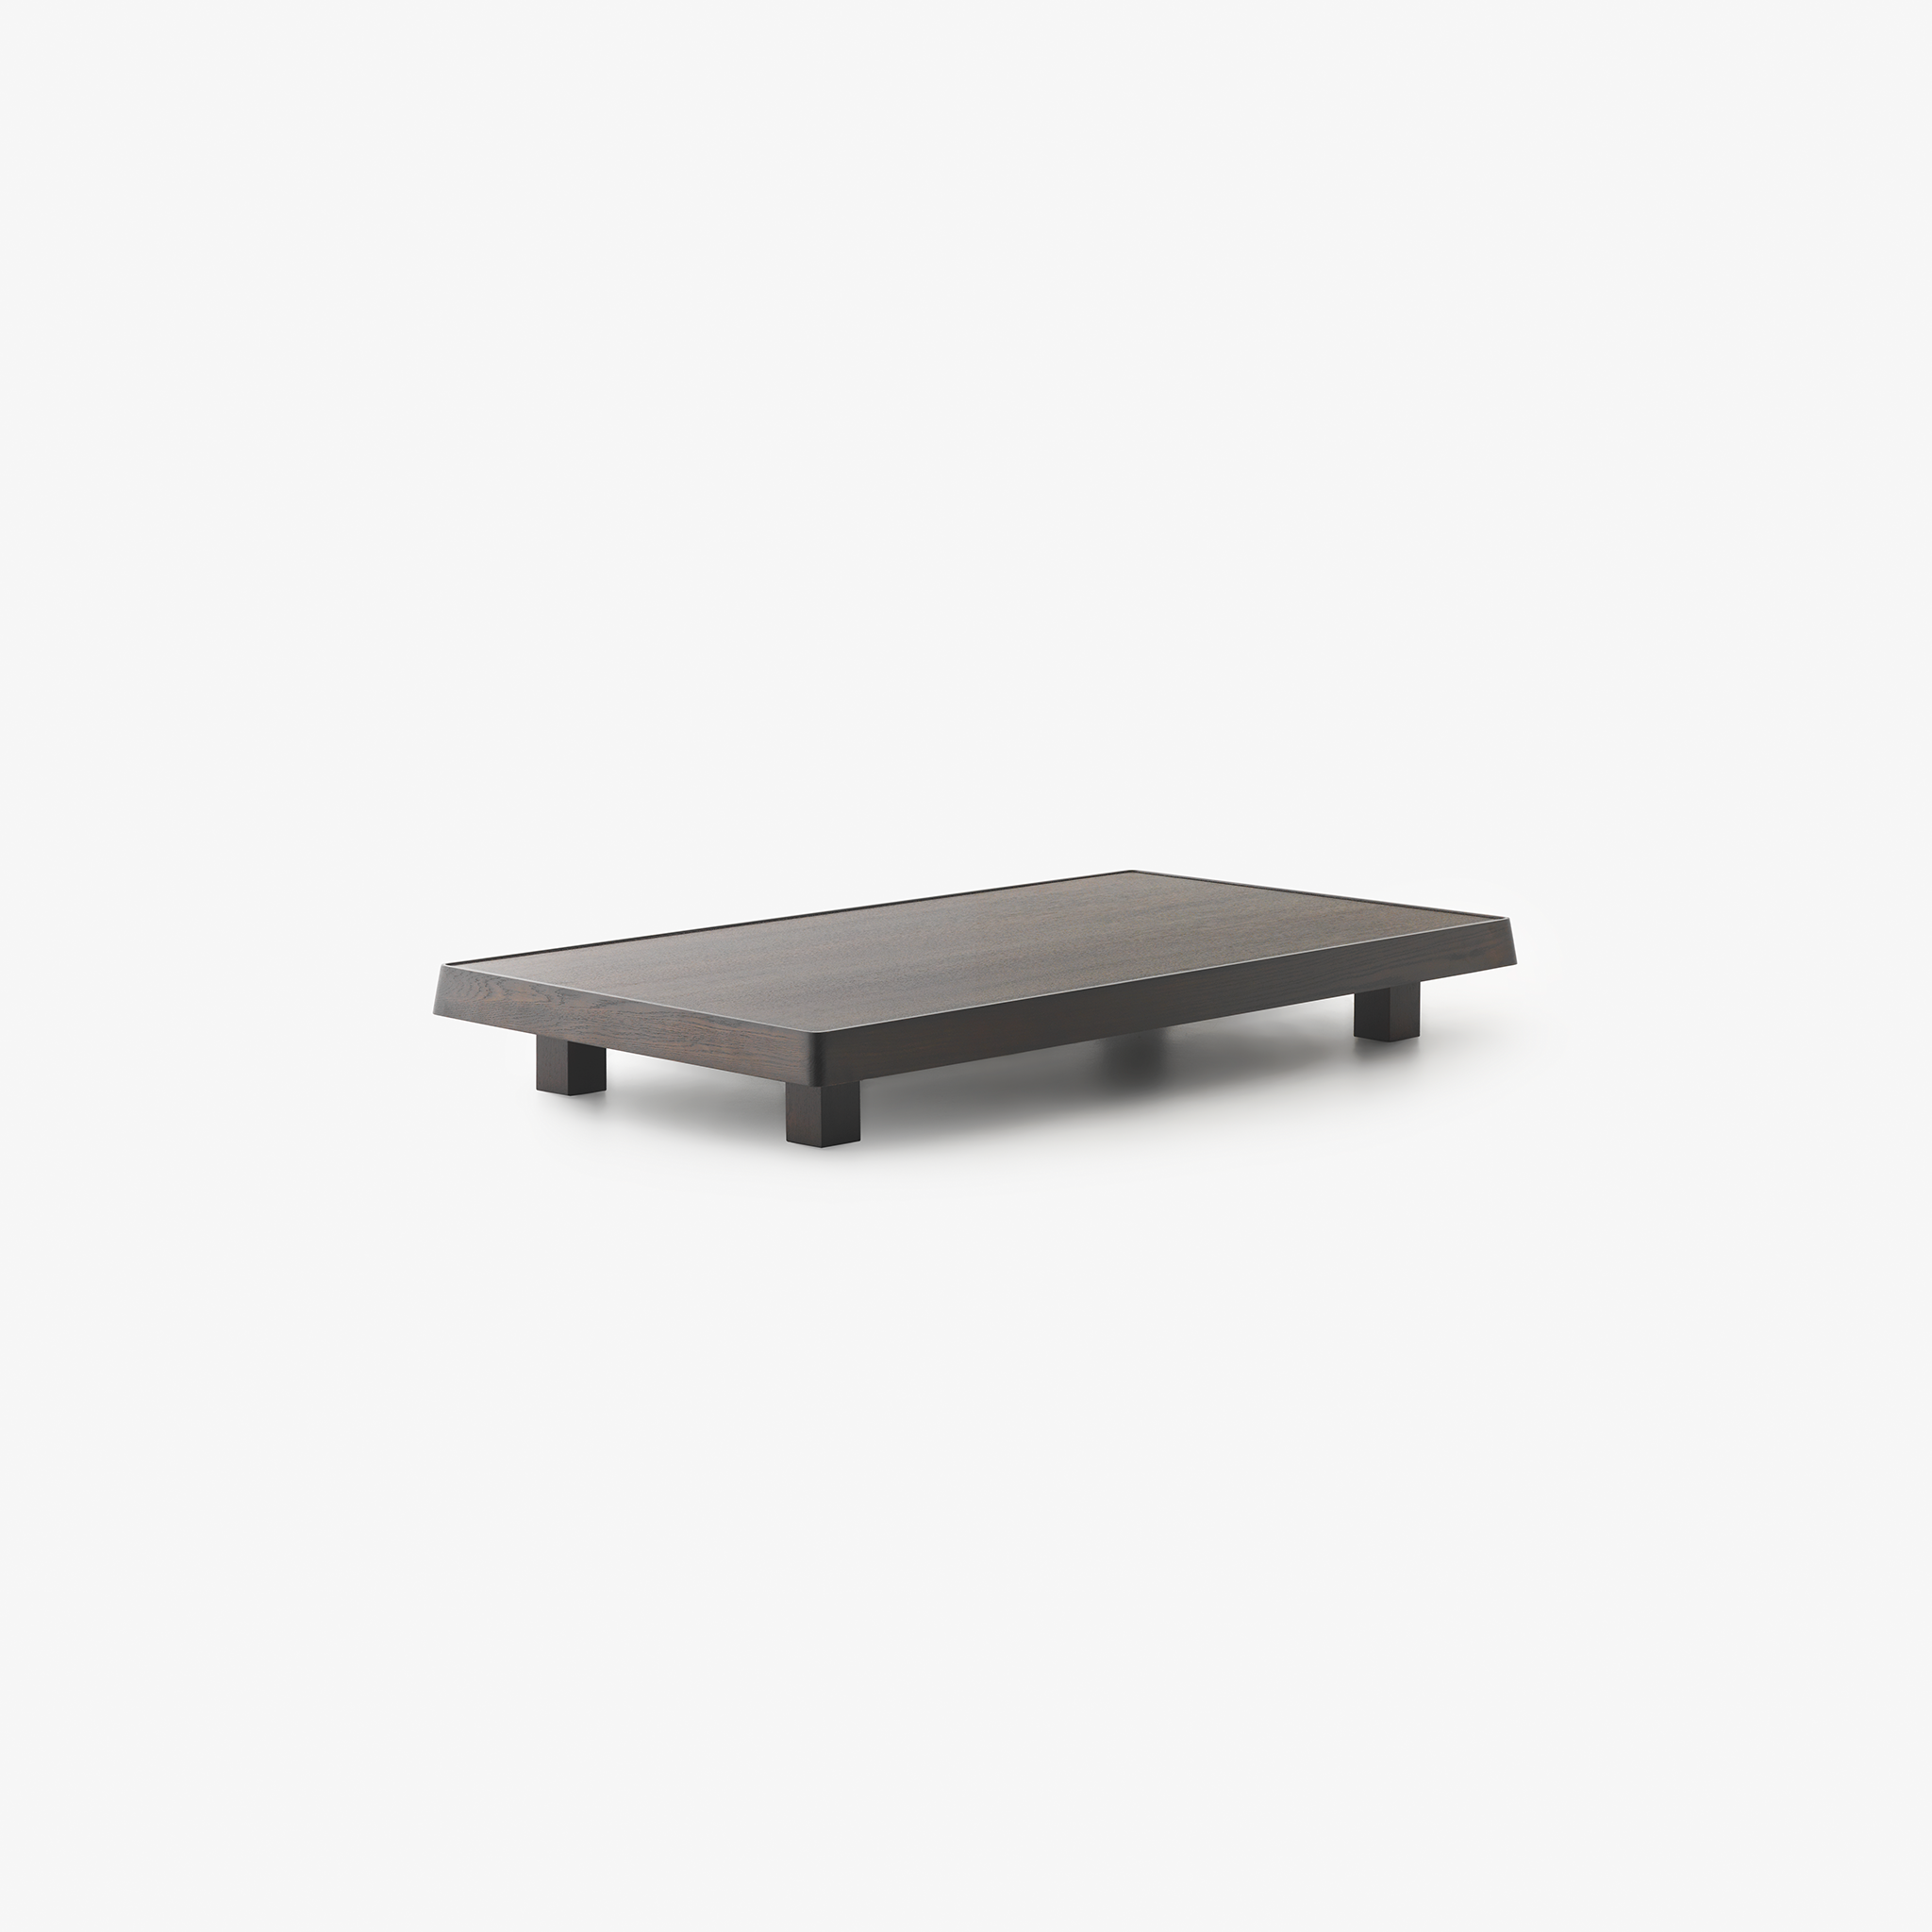 The Rover Coffee Table - Rectangle